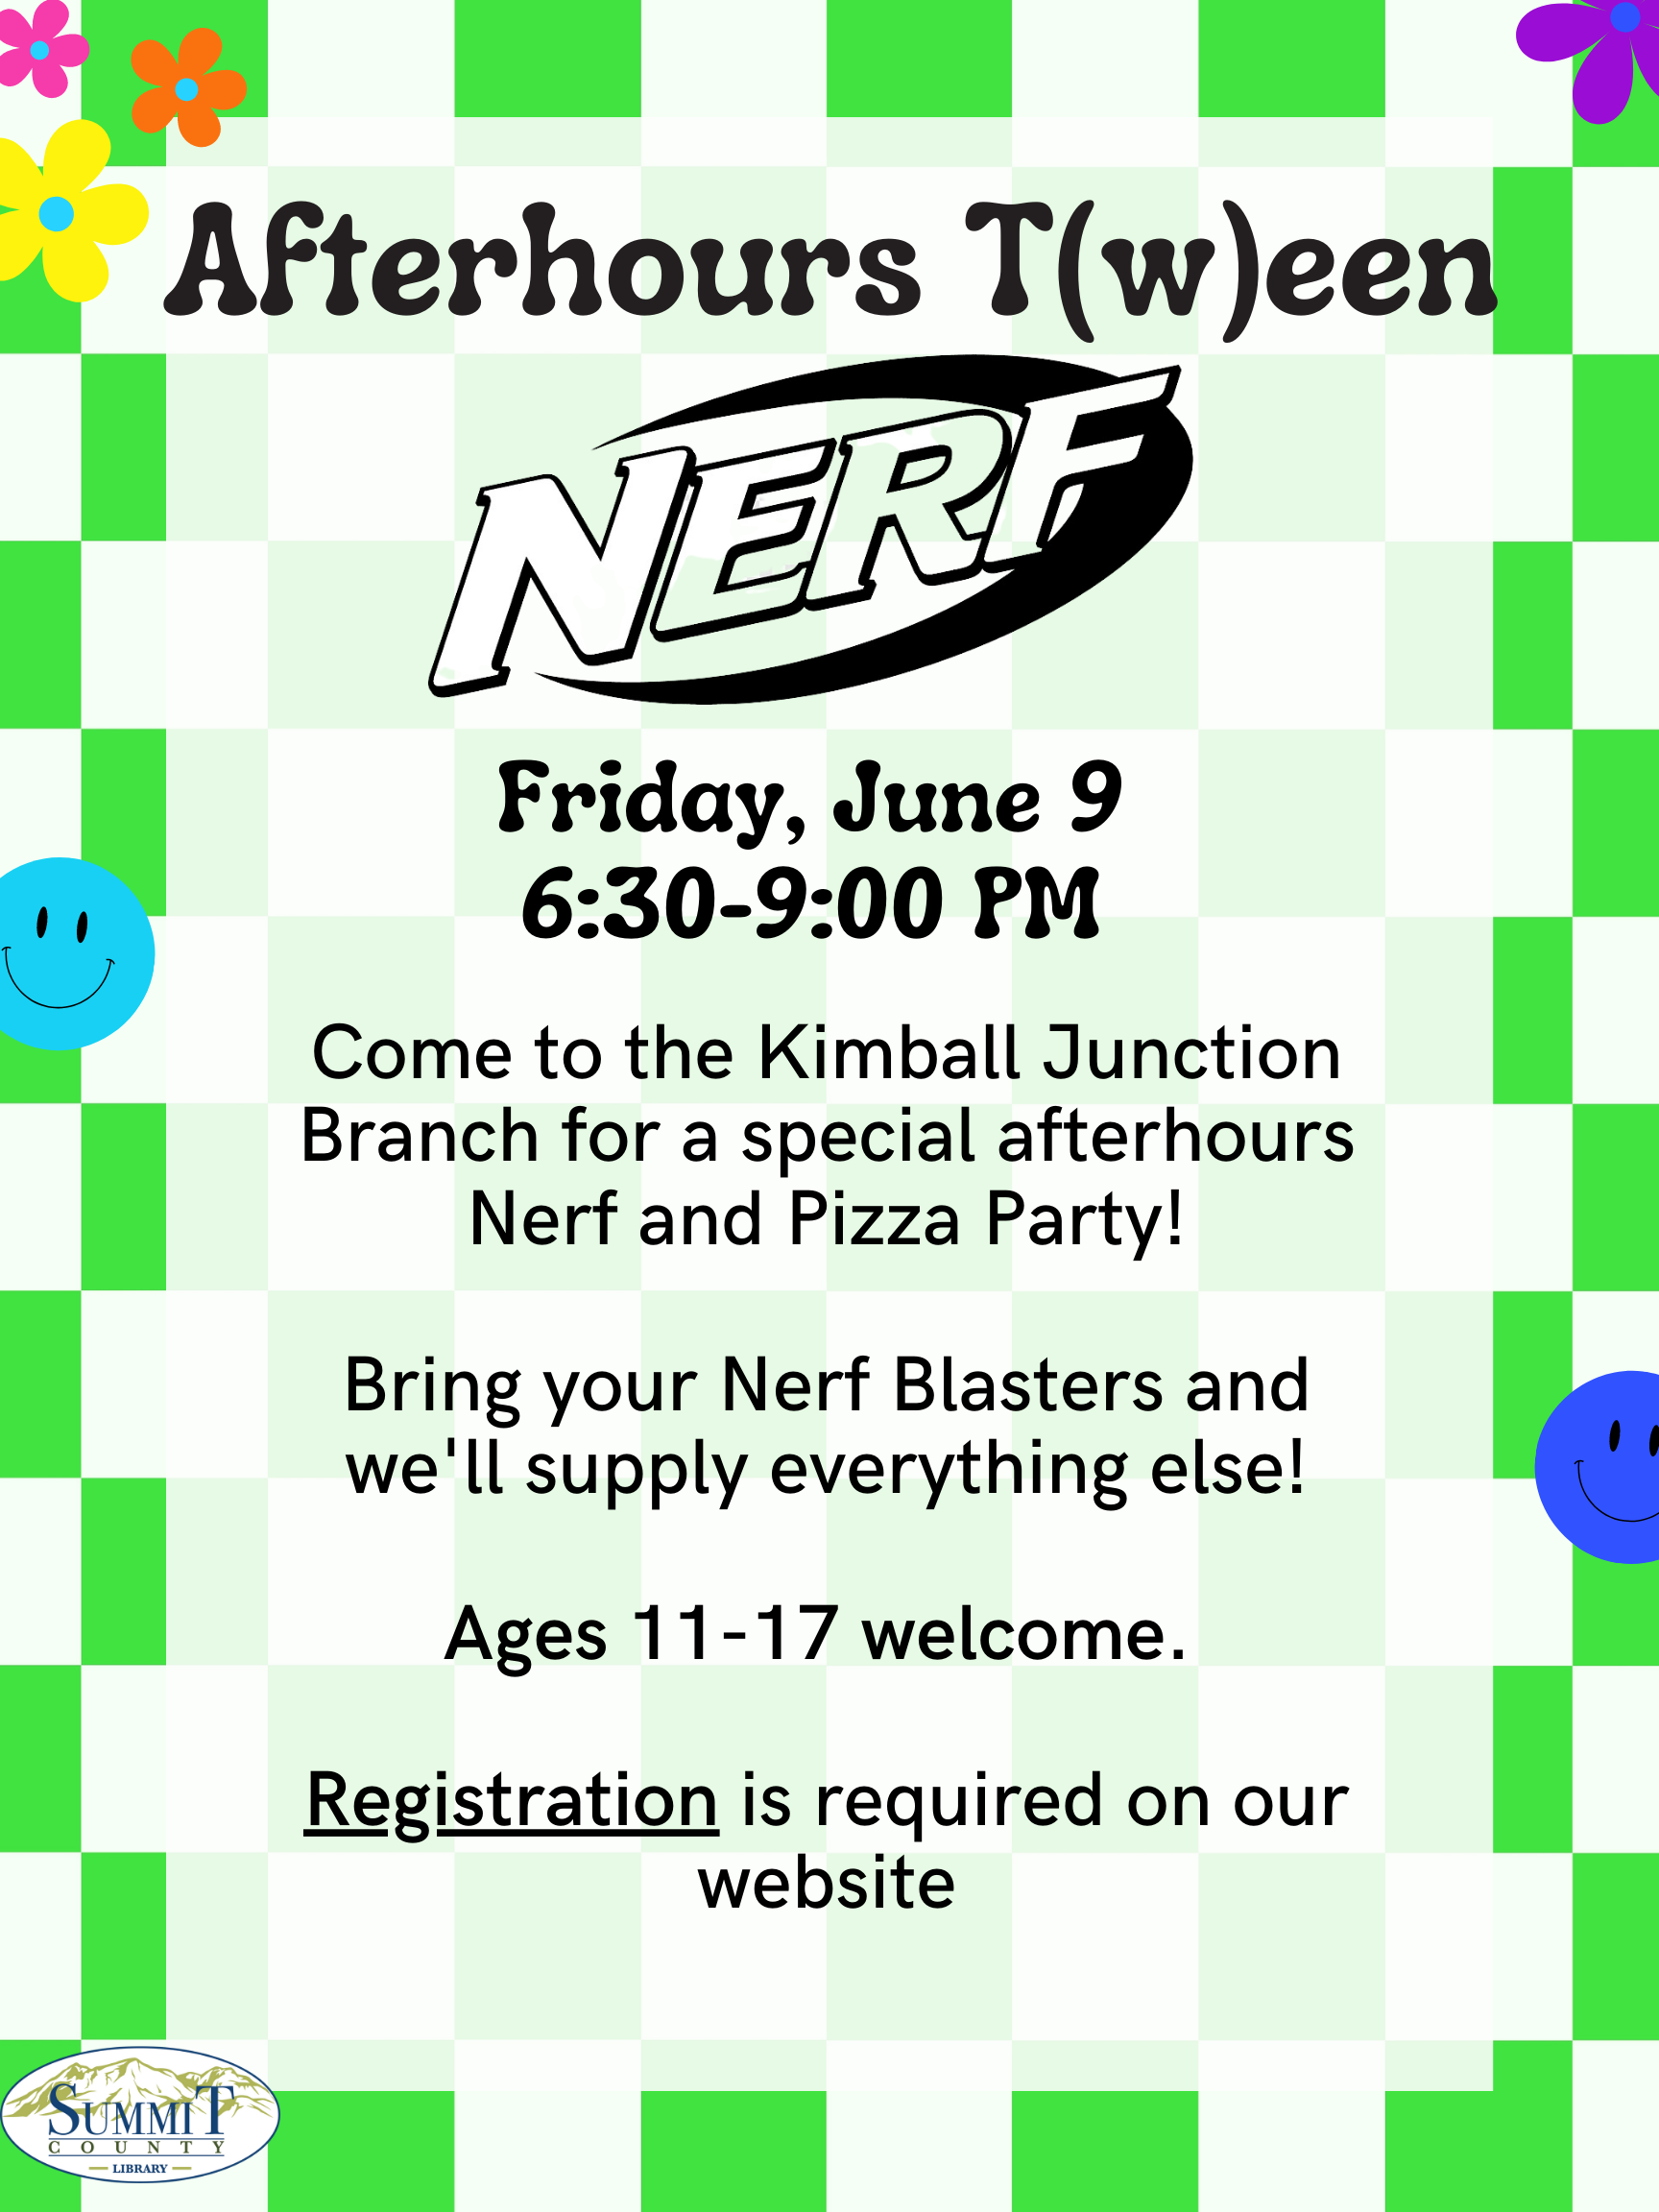 Afterhours T(w)een Nerf and Pizza Night at the Kimball Junction Library!